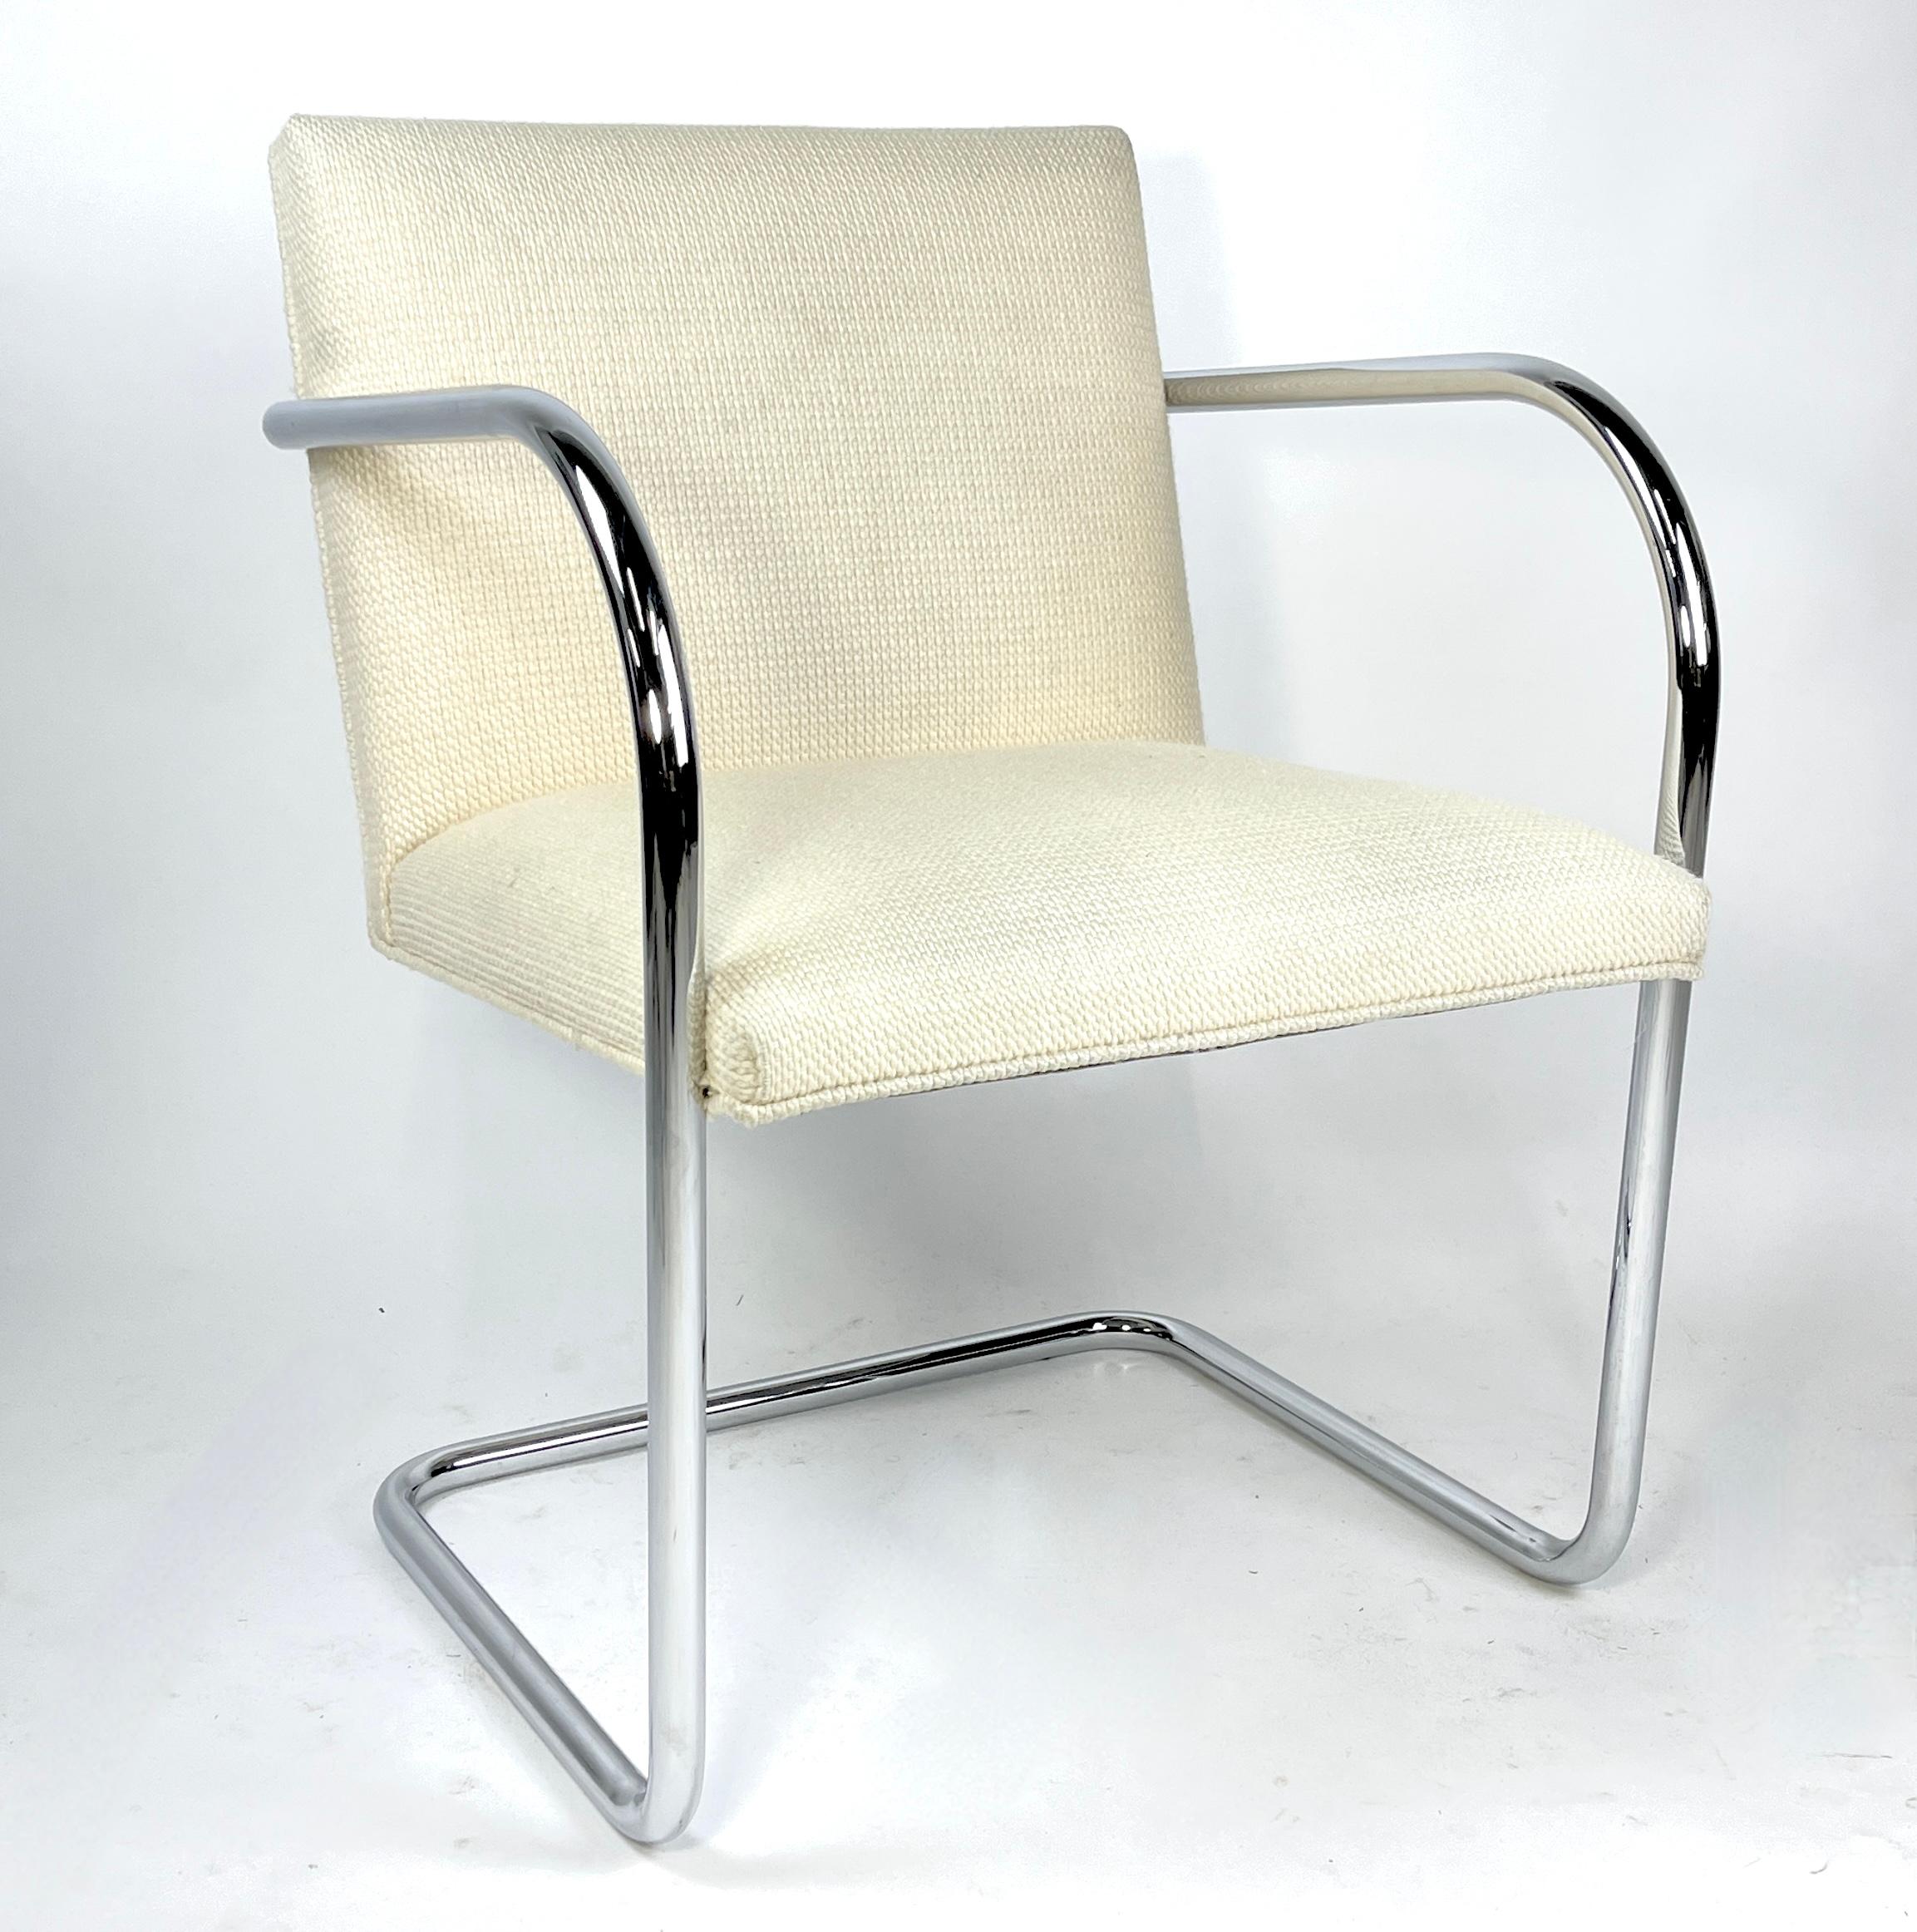 Set of 4 Mies Van Der Rohe for Knoll Brno Chairs in Cato Upholstery 60 available In Good Condition For Sale In Hudson, NY